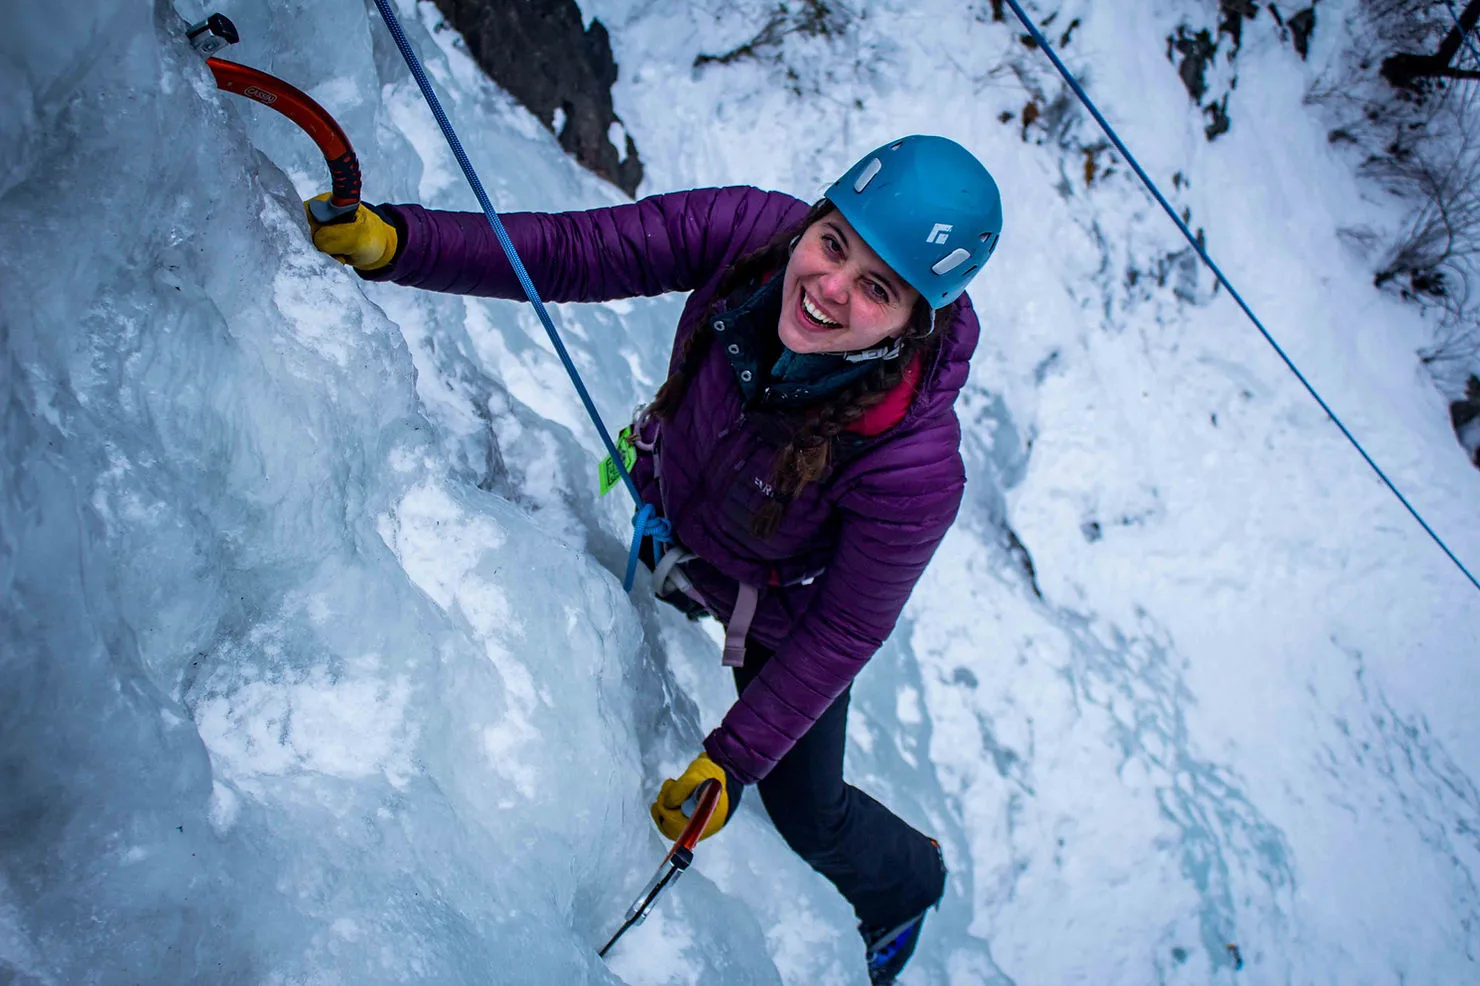 Ice Climbing in Denver? It’s closer than you might think!